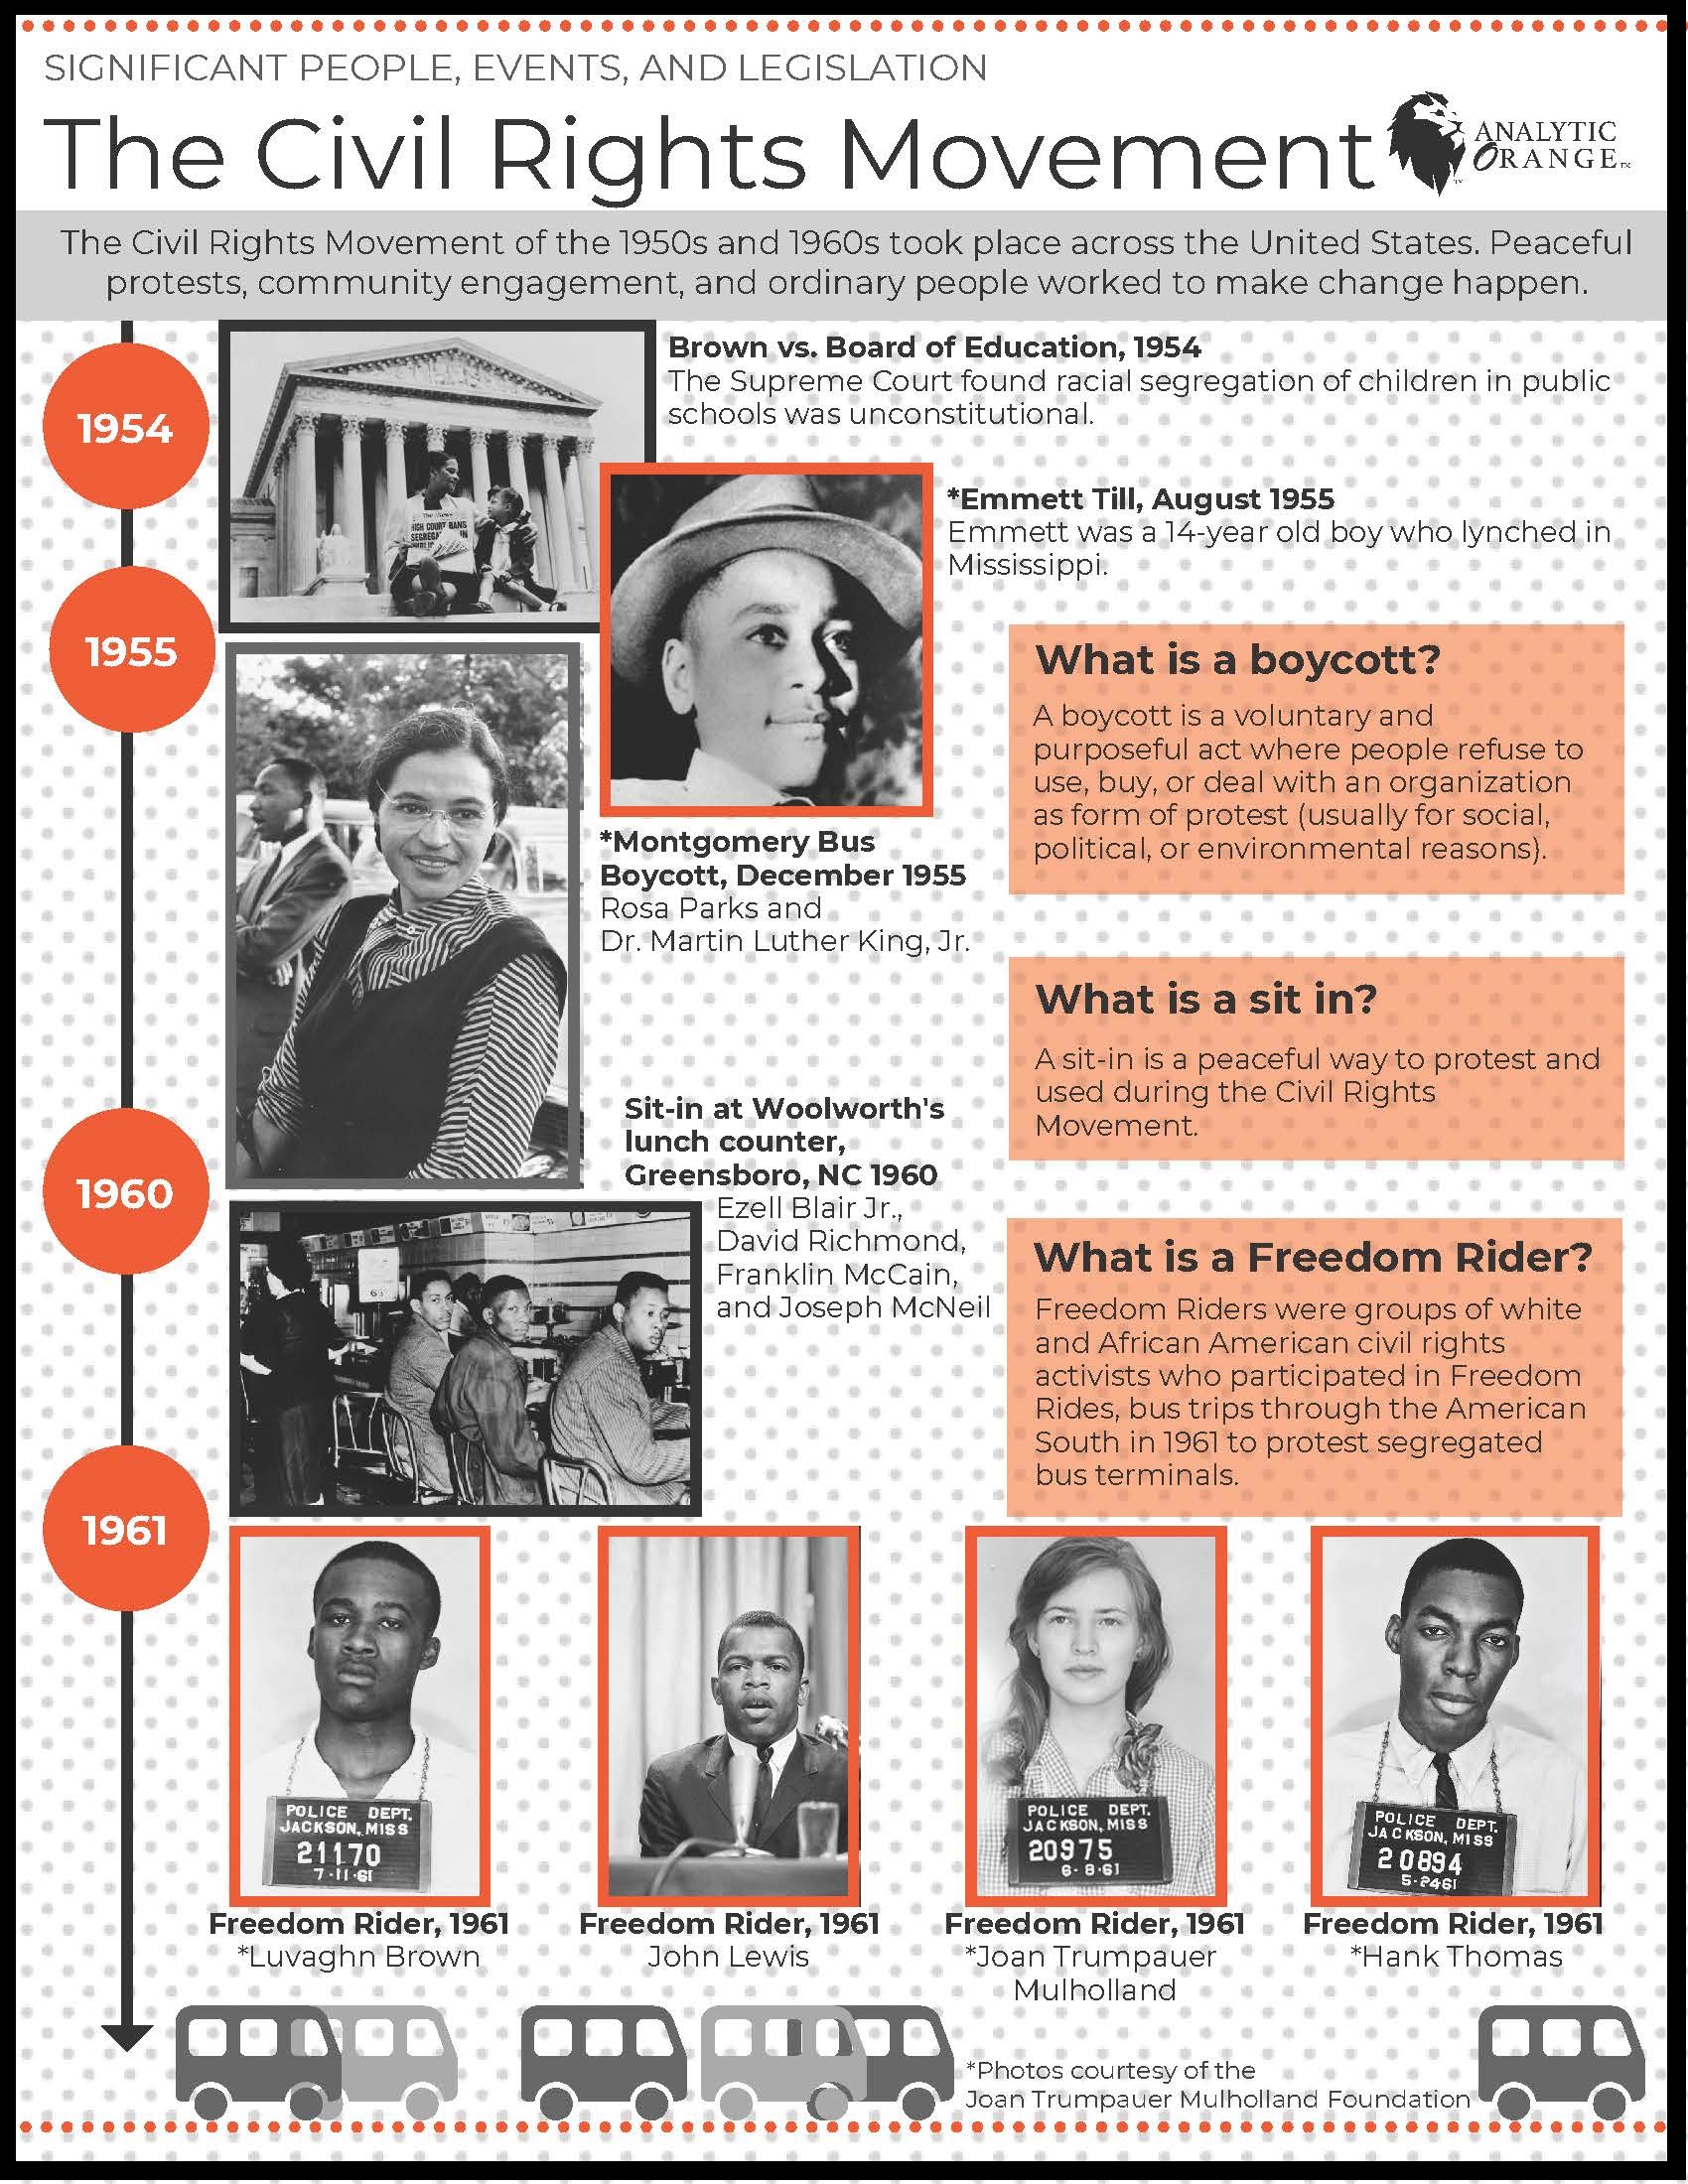 The Civil Rights Movement Timeline by Analytic Orange. The Civil Rights Movement of the 1950s and 1960s took place across the US. Peaceful protests, community engagement, and ordinary people worked to make the change happen. What is a boycott? What is a sit in? What is a Freedom Rider? 1954 Brown vs. Board of Education. 1955 Emmett Till, Rosa Parks, Dr. Martin Luther King Jr.. 1960 Sit-in at Woolworth's lunch counter. 1961 Freedom Riders Luvahn Brown, John Lewis, Joan Trumpauer Mulholland, Hank Thomas.